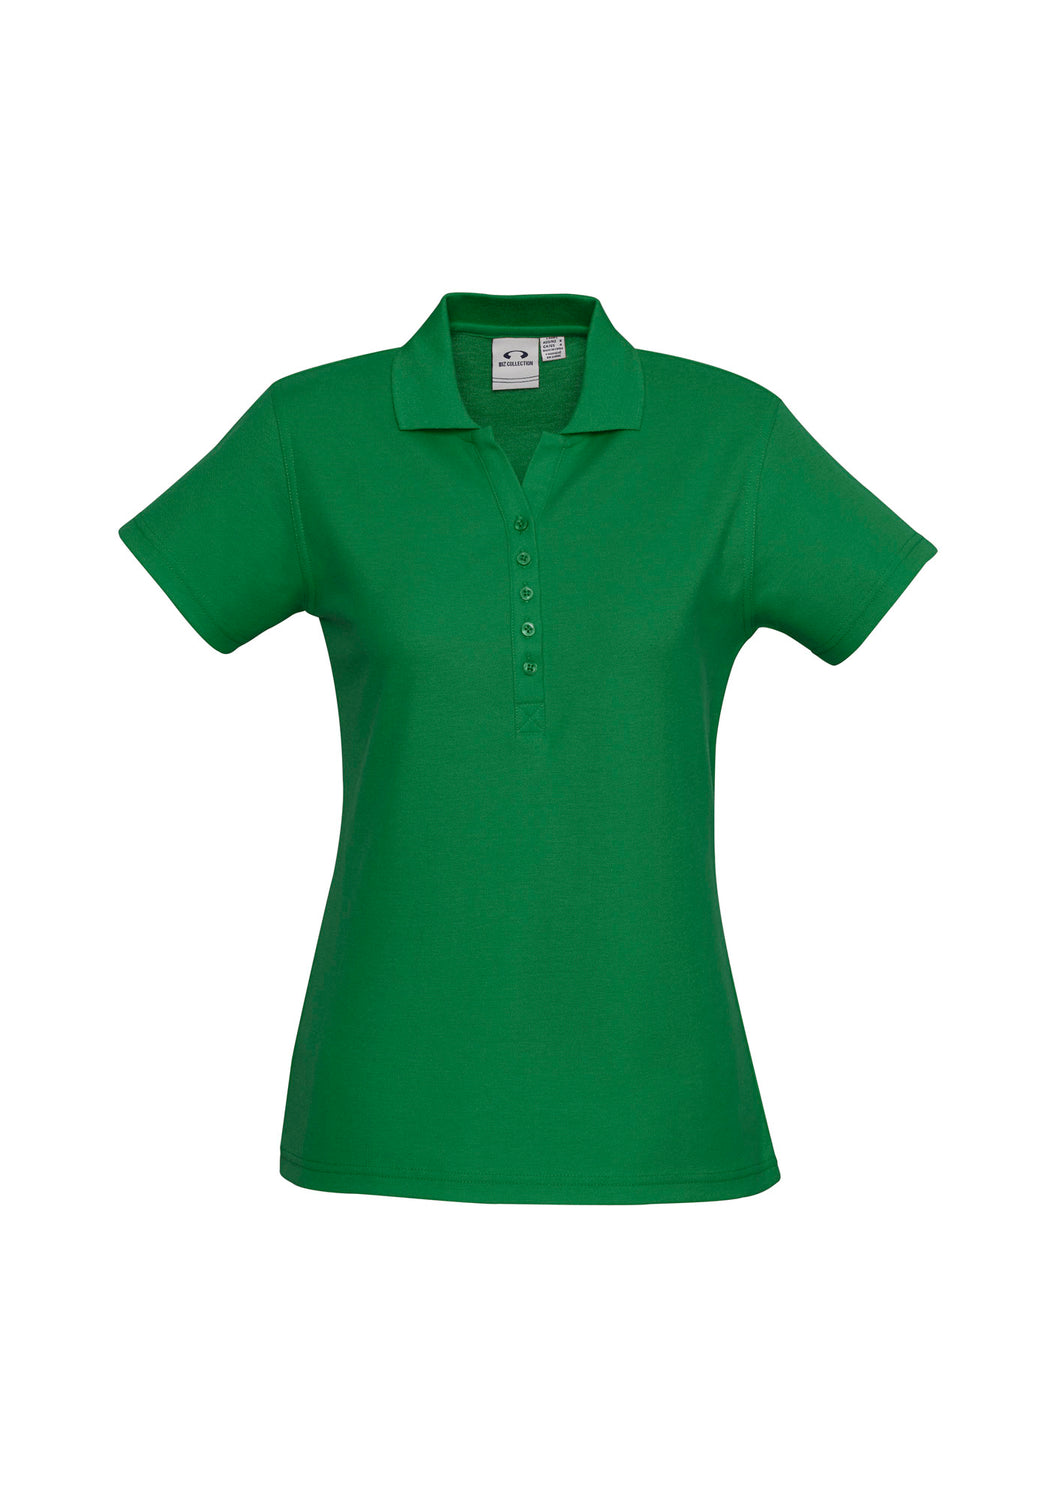 Ladies Classic Pique Knit Polo - Kelly